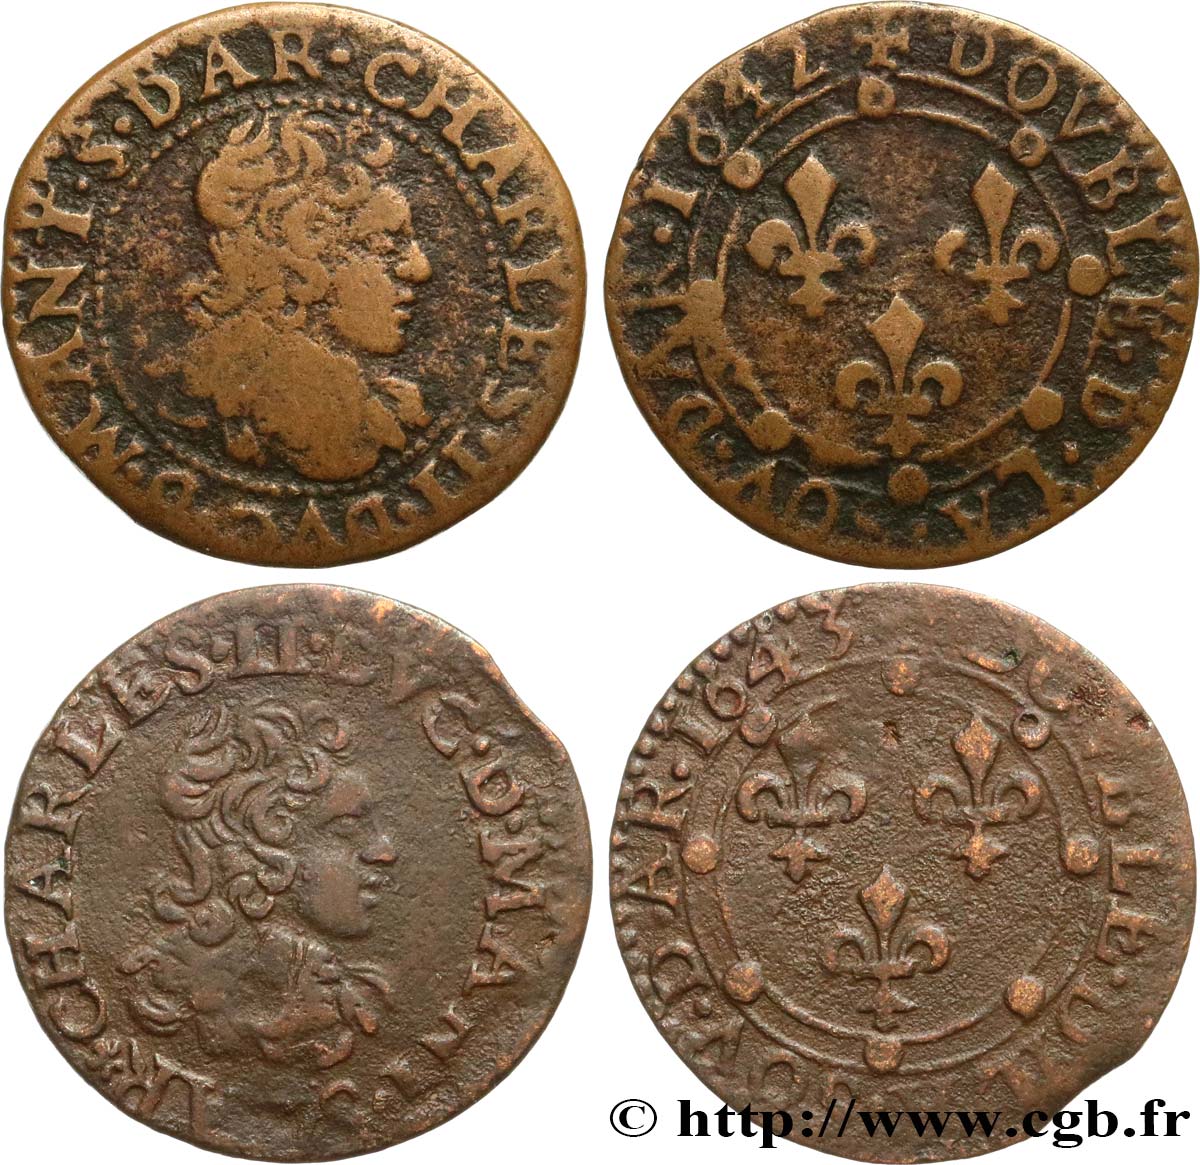 ARDENNES - PRINCIPALITY OF ARCHES-CHARLEVILLE - CHARLES II GONZAGA Lot de 2 double tournois VF/XF